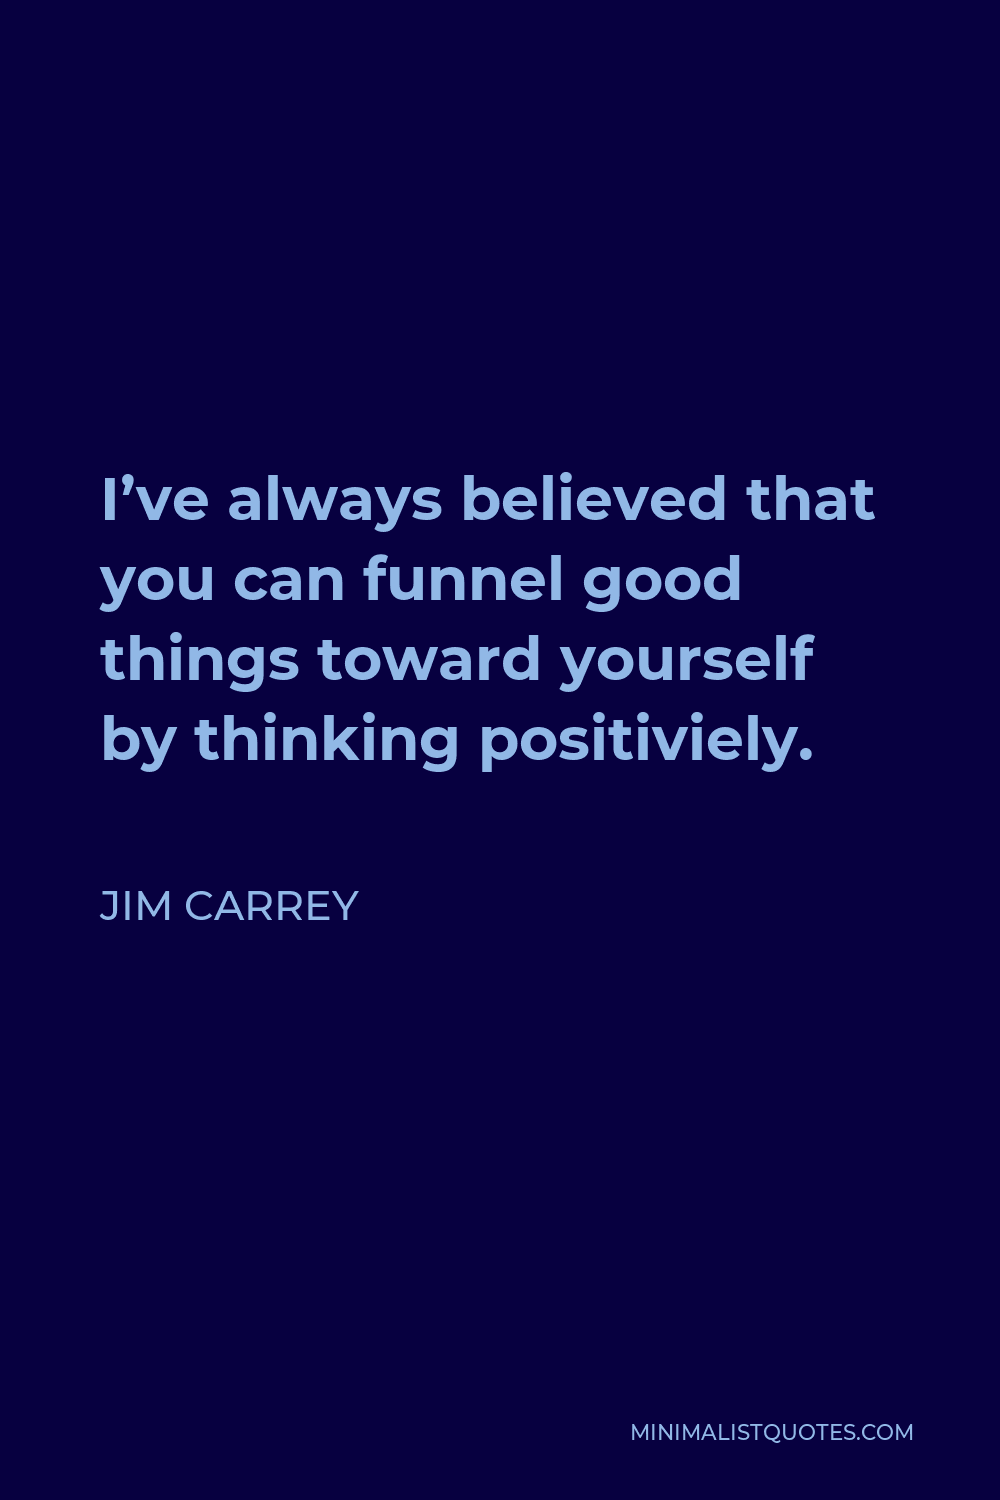 Jim Carrey Quote - I’ve always believed that you can funnel good things toward yourself by thinking positiviely.